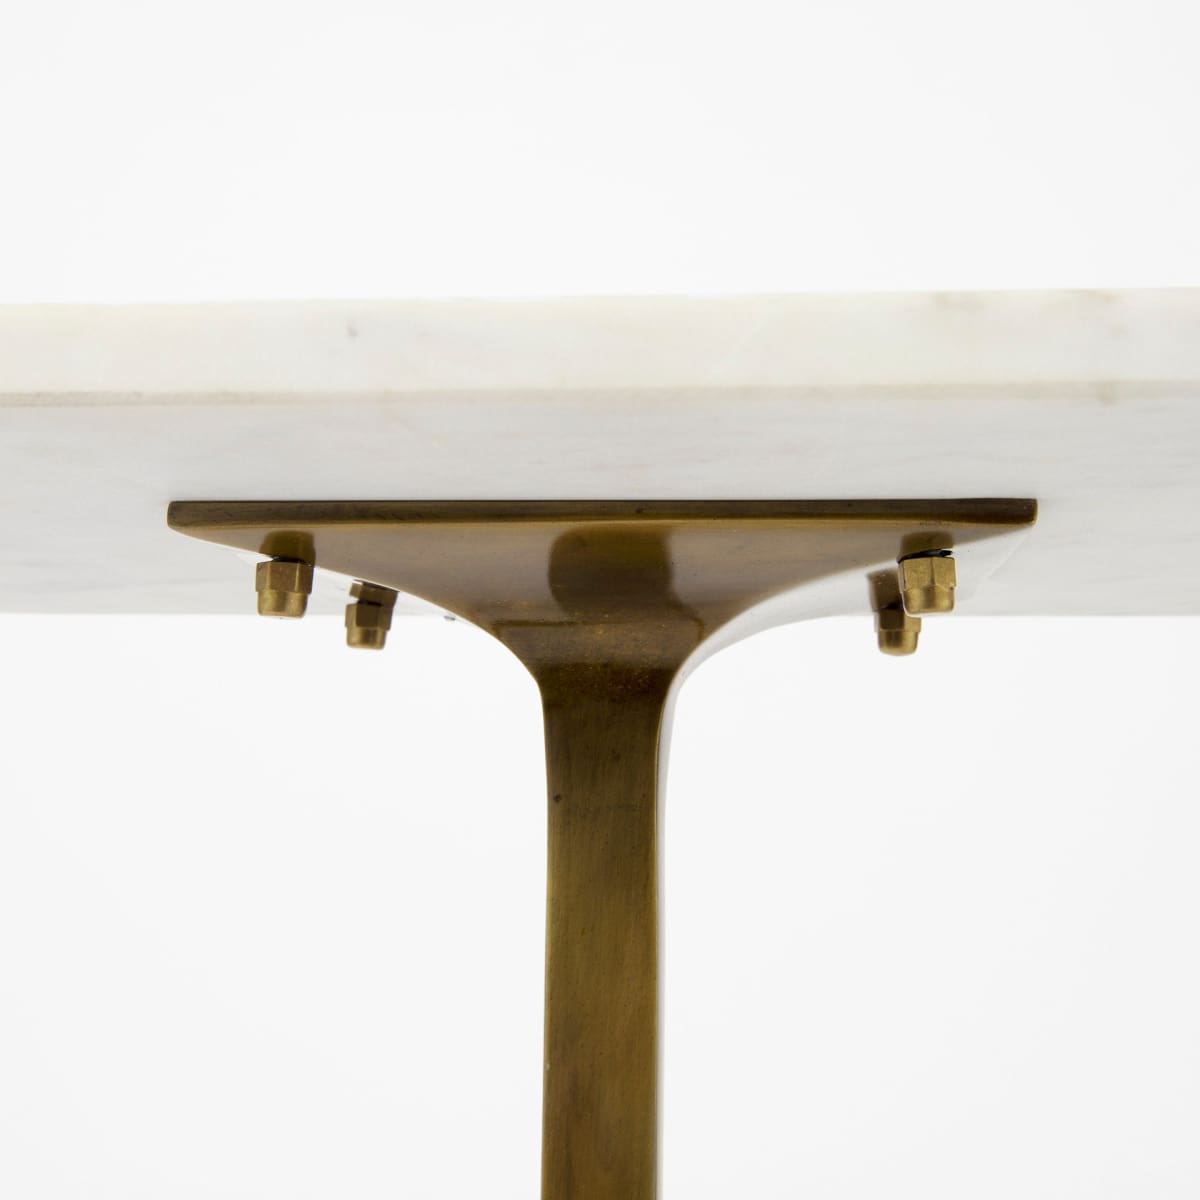 Preston Accent Table White Marble | Gold Metal - accent-tables